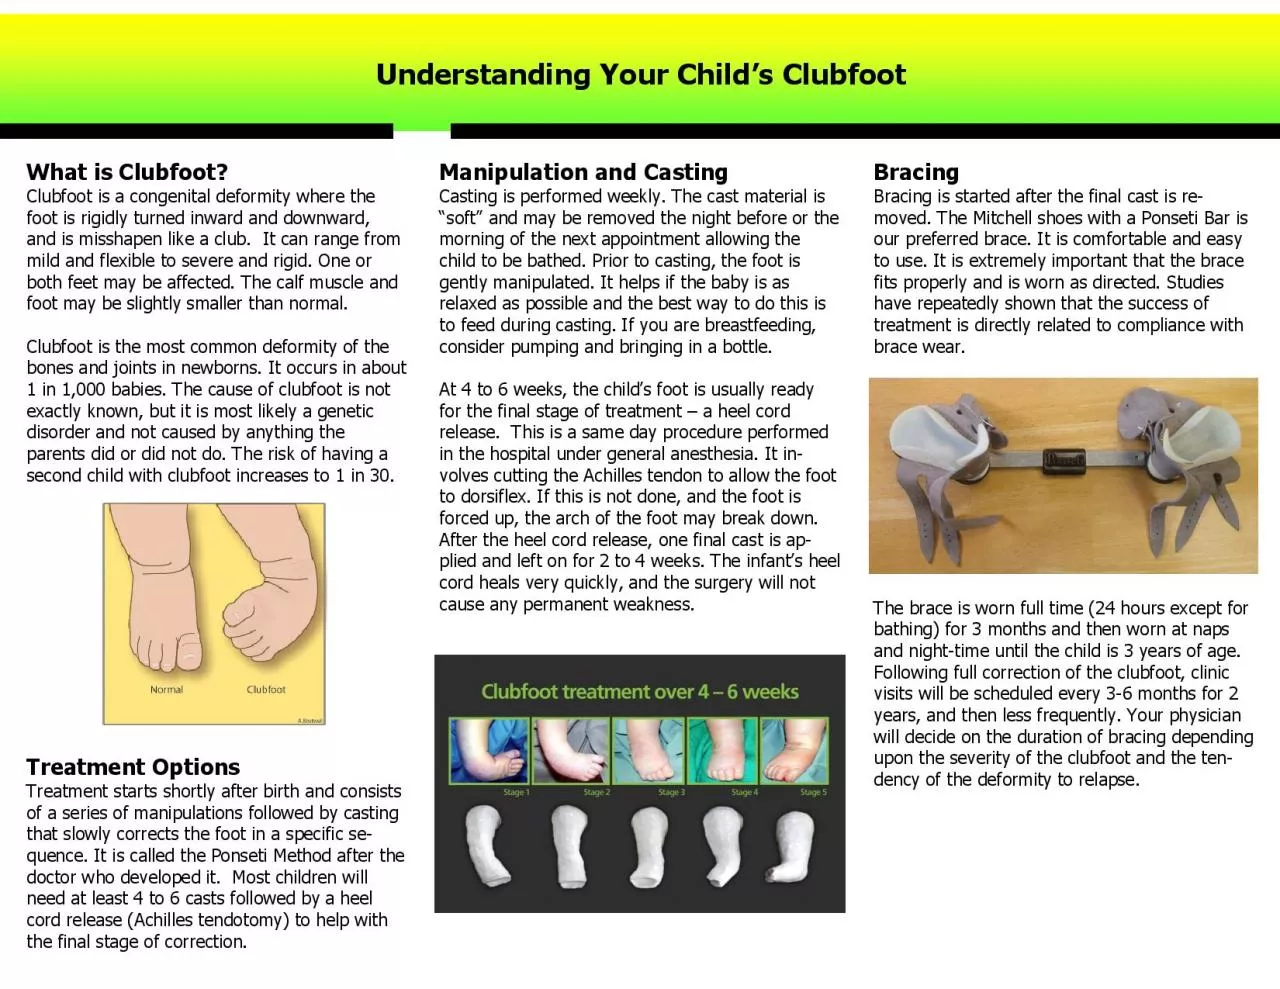 What is Clubfoot